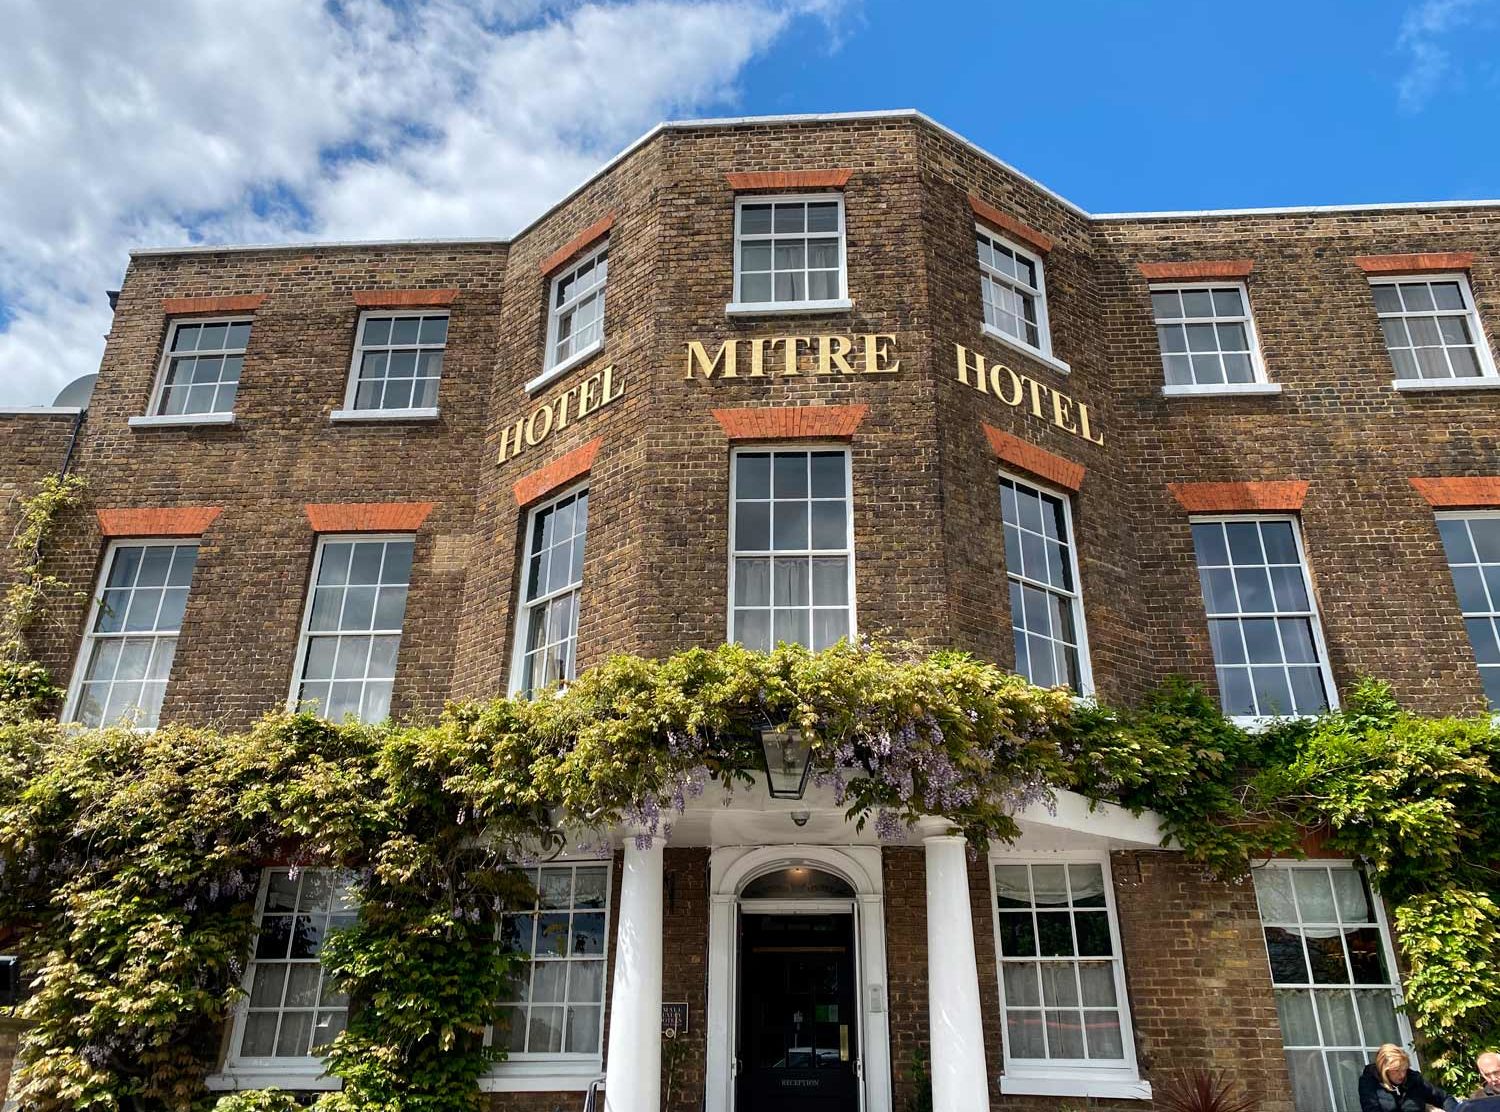 The Mitre Hampton Court The hotel's facade caught in a moment of sunshine